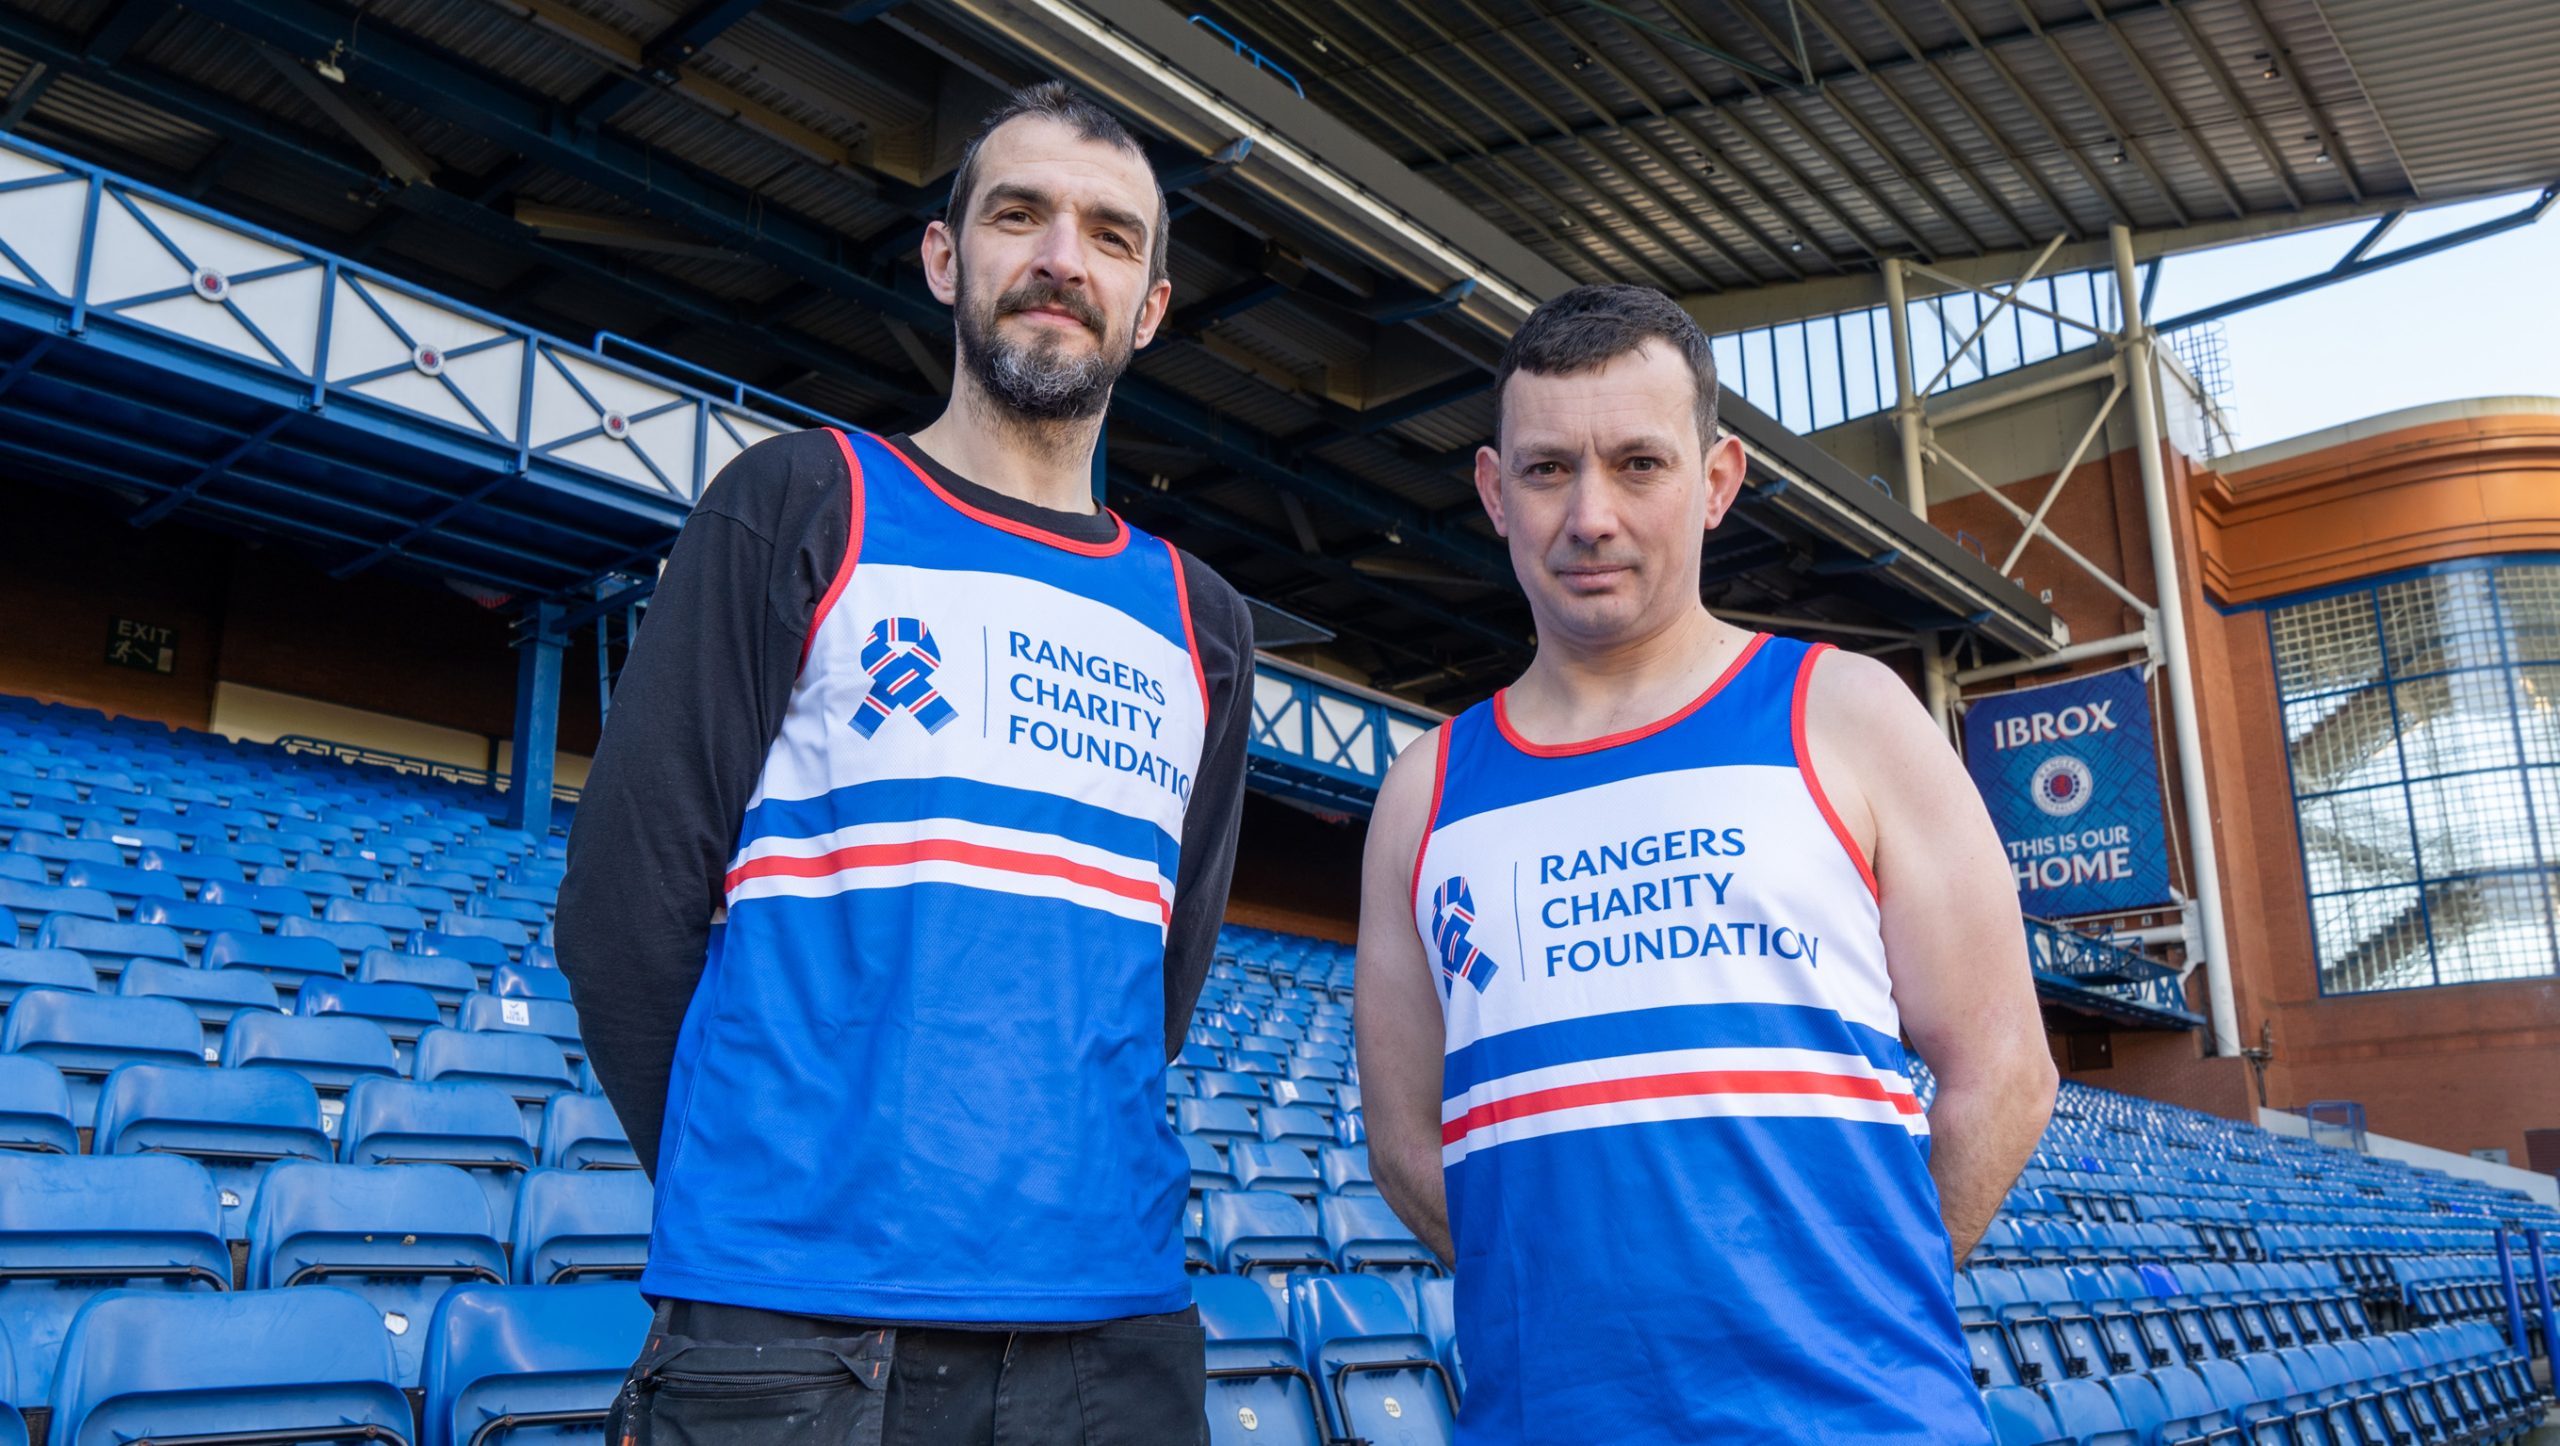 Fundraisers To Take On ‘Coolest Marathon On Earth’ Next Week